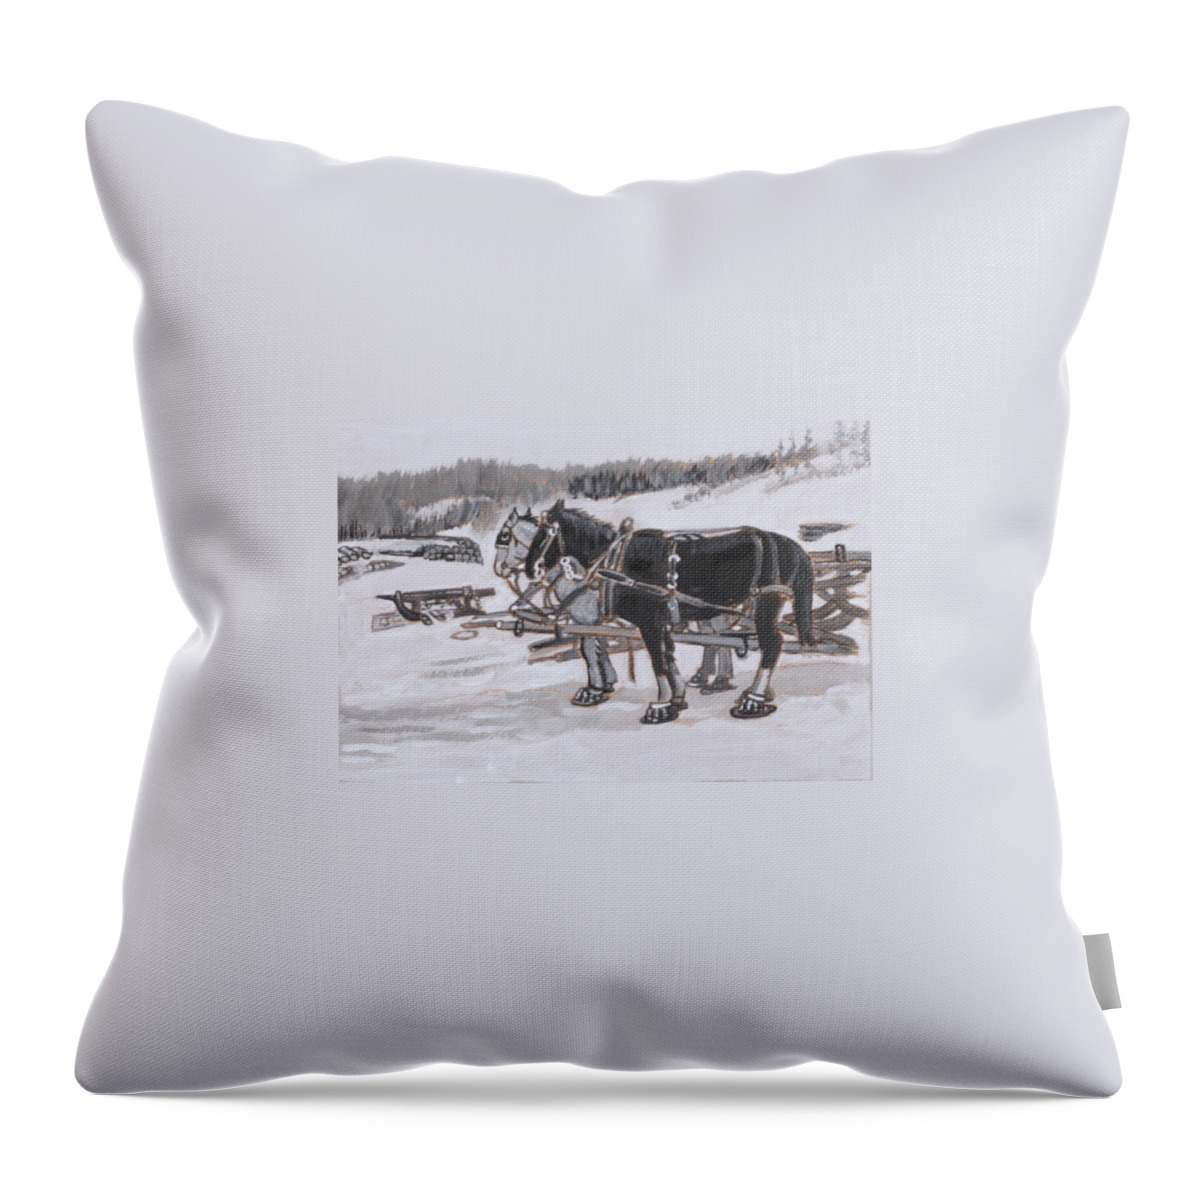 Historical Throw Pillow featuring the painting Horses Wearing Snowshoes Historical Vignette by Dawn Senior-Trask